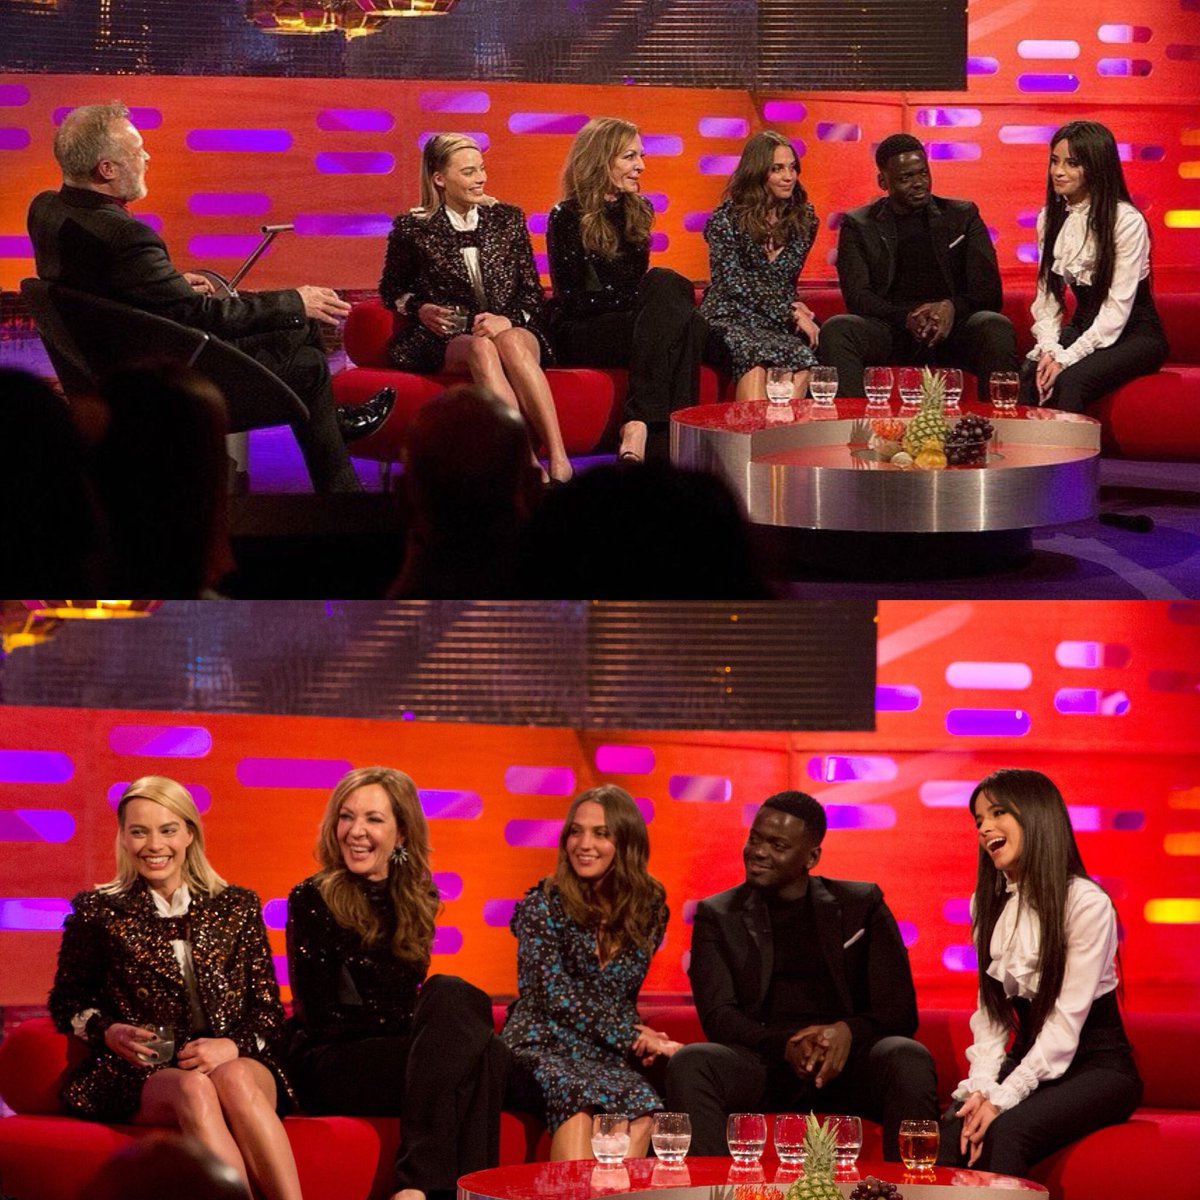 today on @BBCOne we have a date on #TheGNShow  at 10:35pm, I’m performing HAVANA and I meet the amazing @MargotRobbie, #DanielKaluuya, @AllisonBJanney, & #AliciaVikander
😦😦😦😦💕💕💕